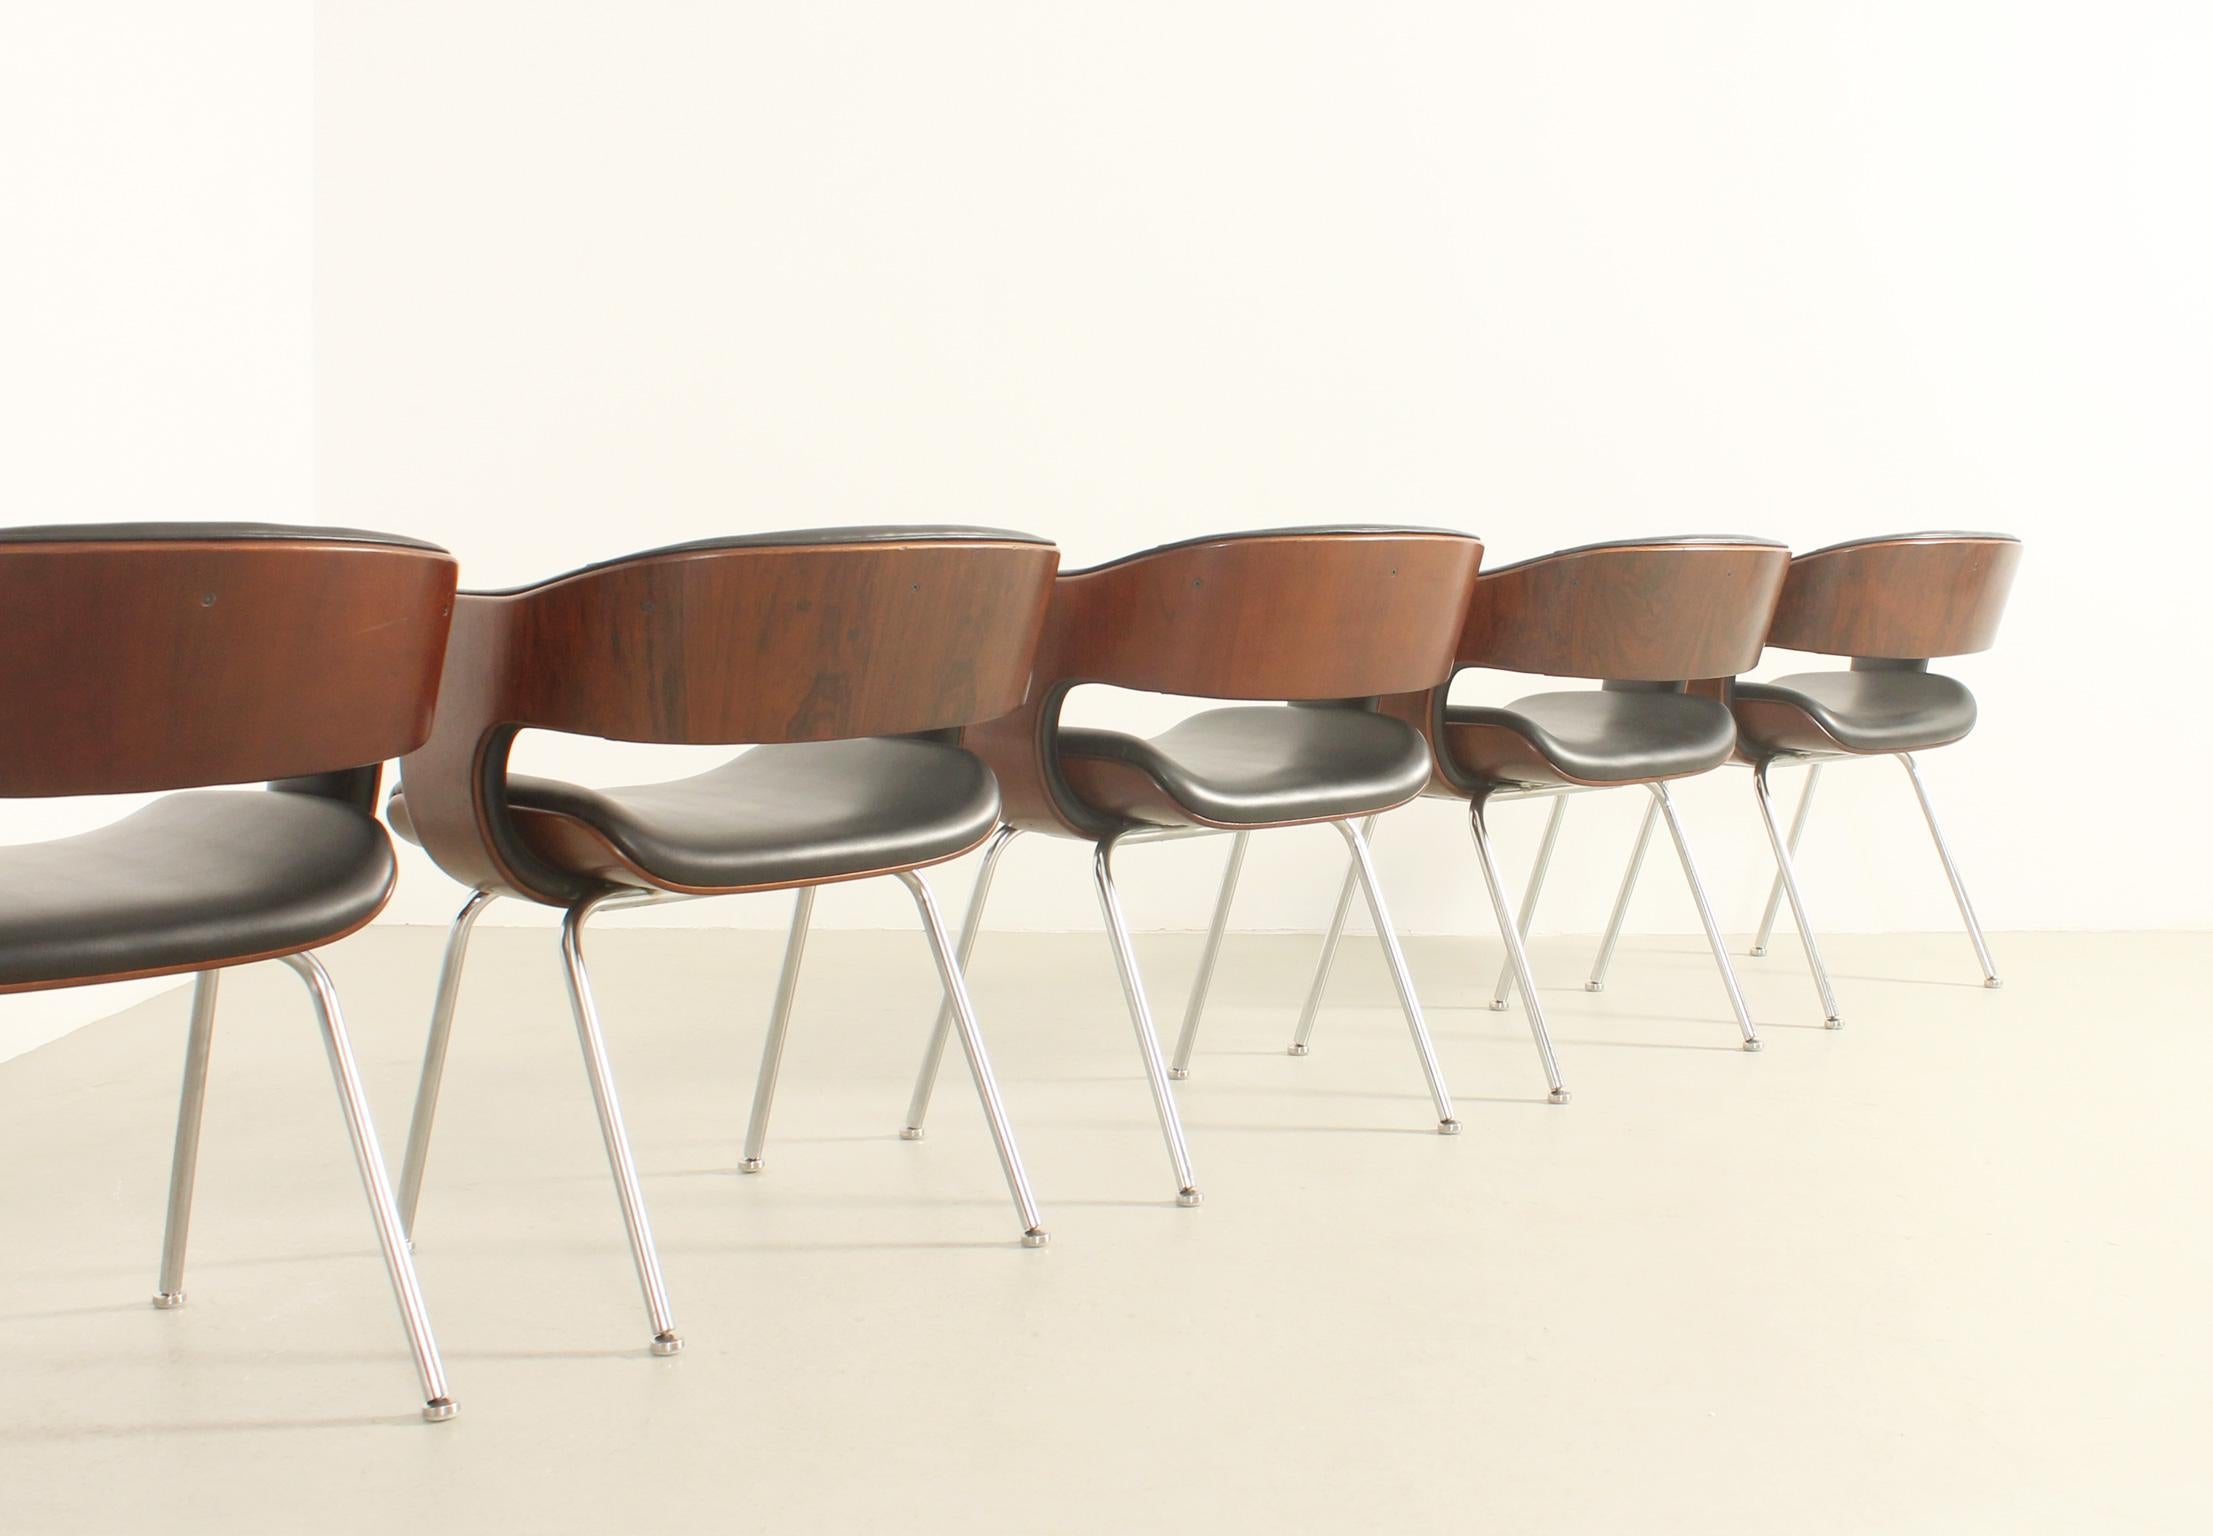 Steel Set of Six Oxford Chairs by Martin Grierson for Arflex, 1963 For Sale